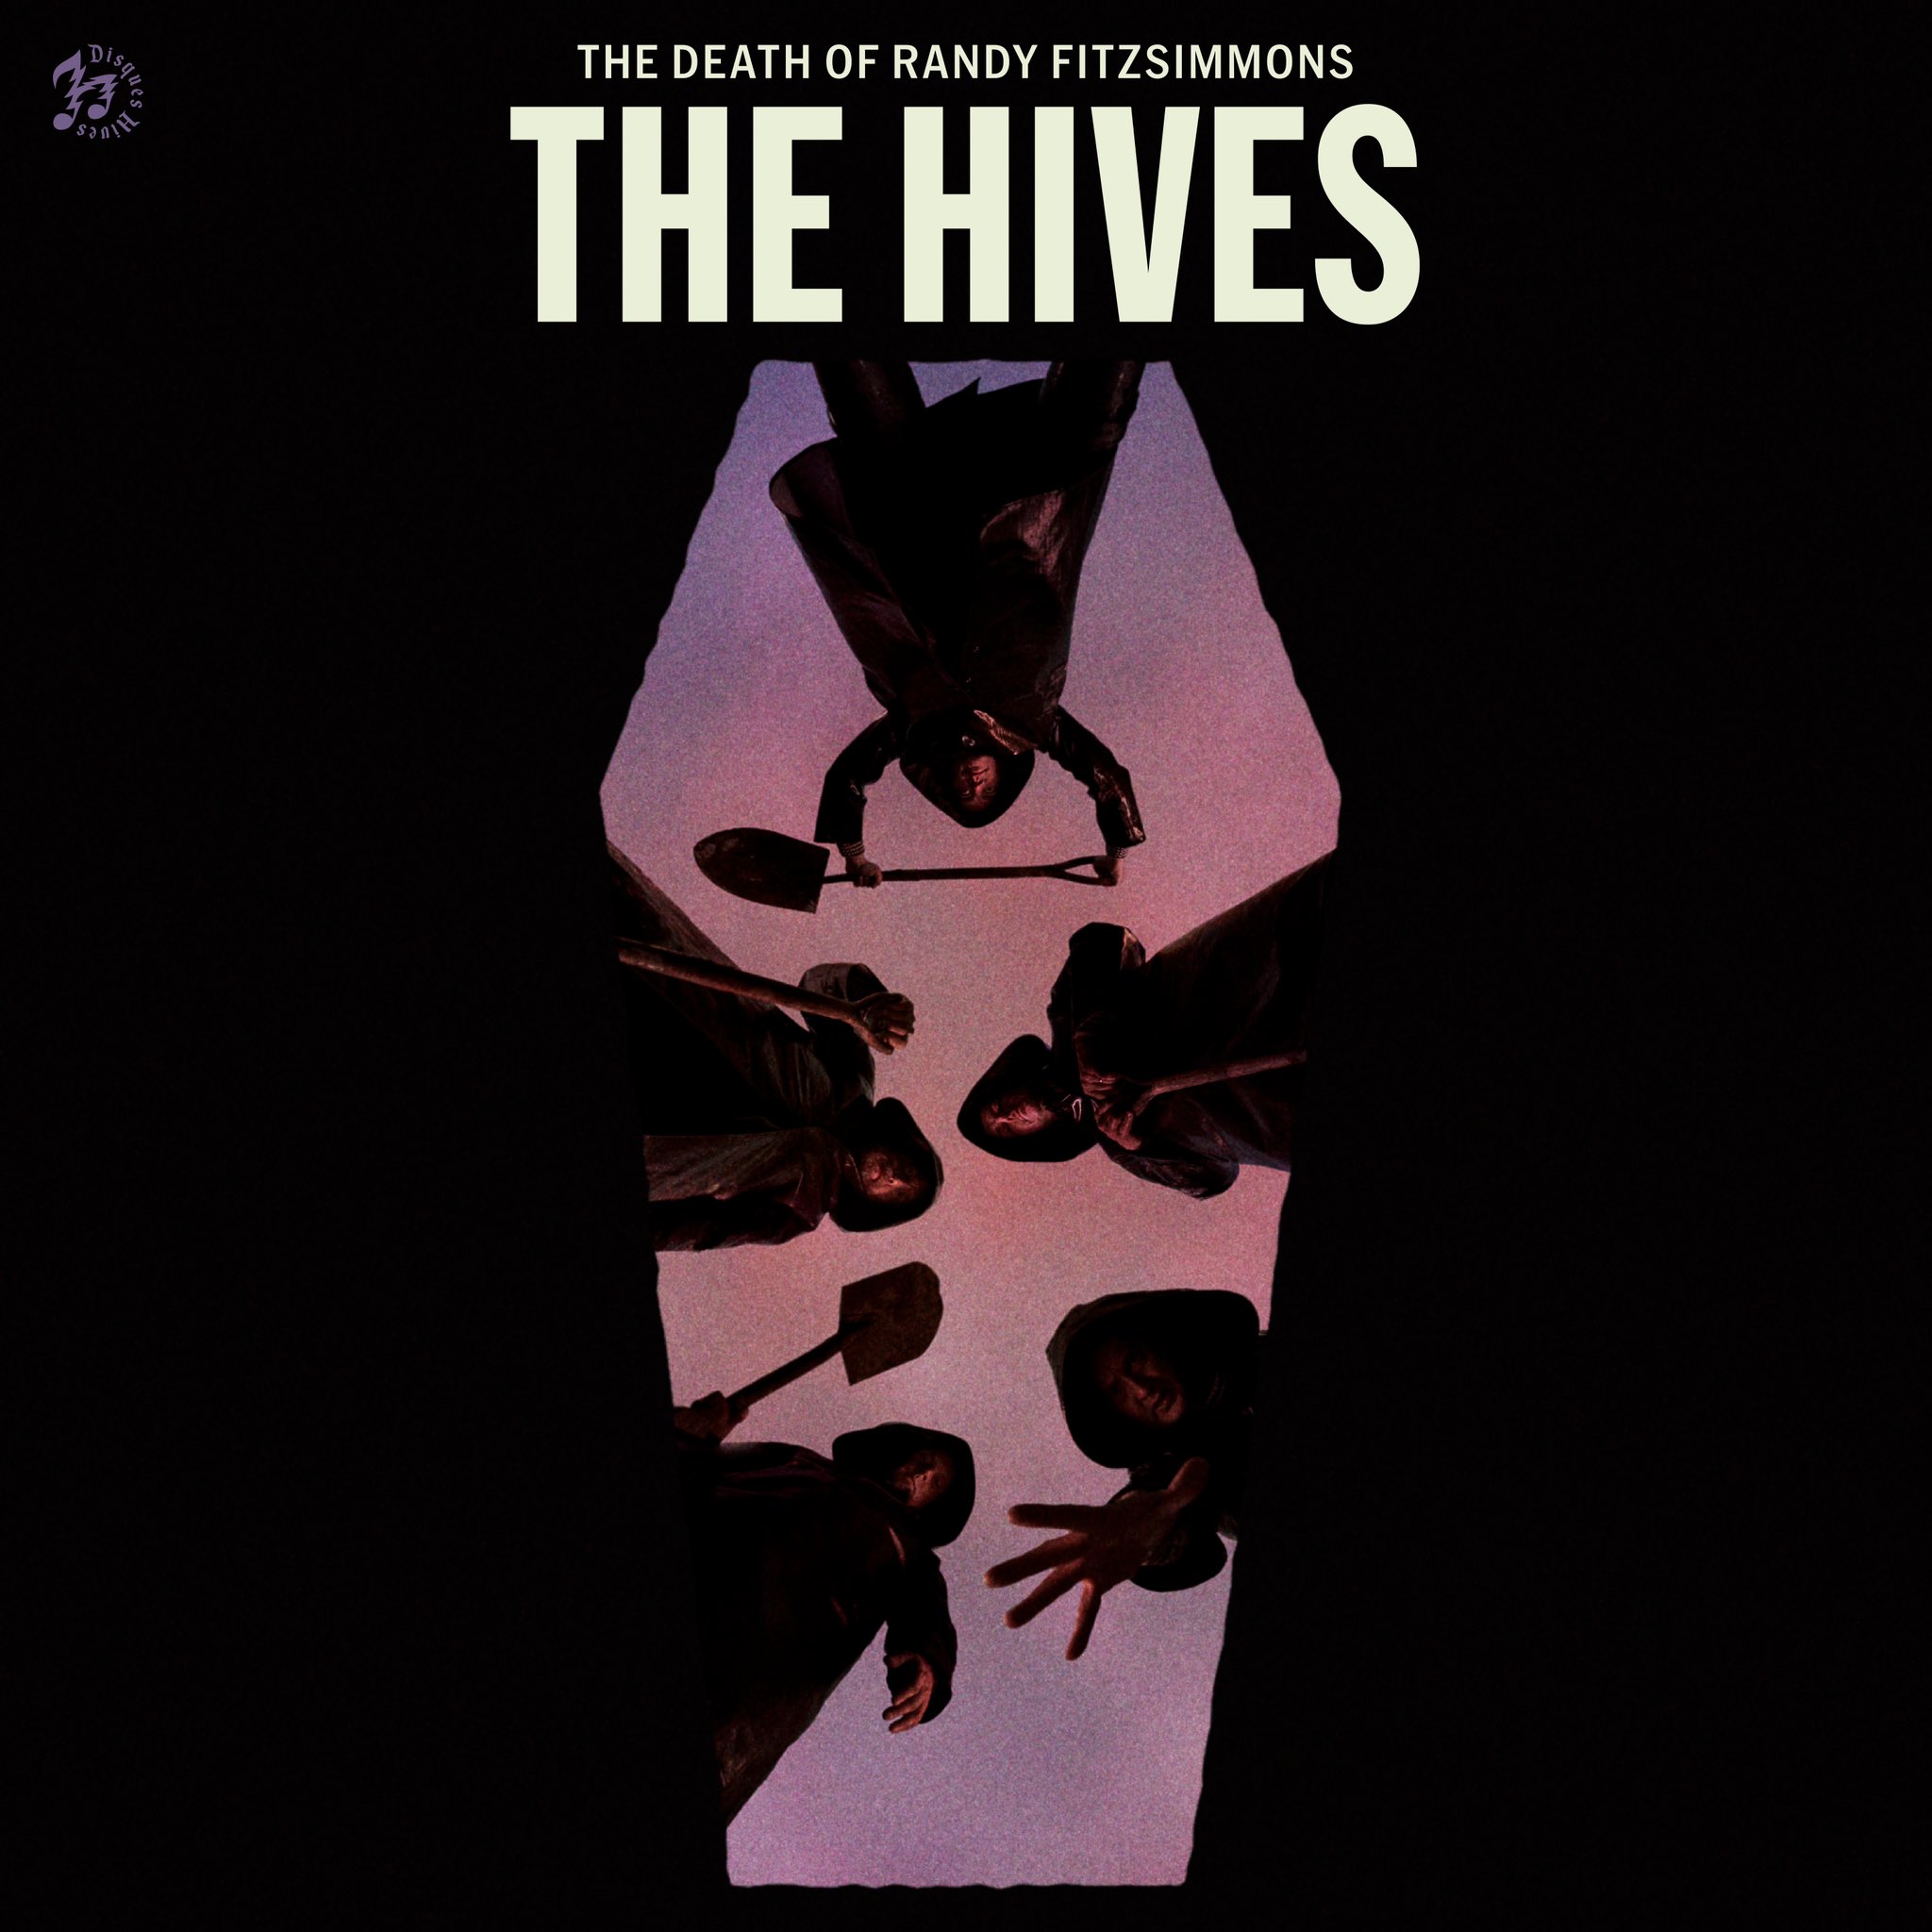 The Hives ‘The Death of Randy Fitzsimmons’ album artwork